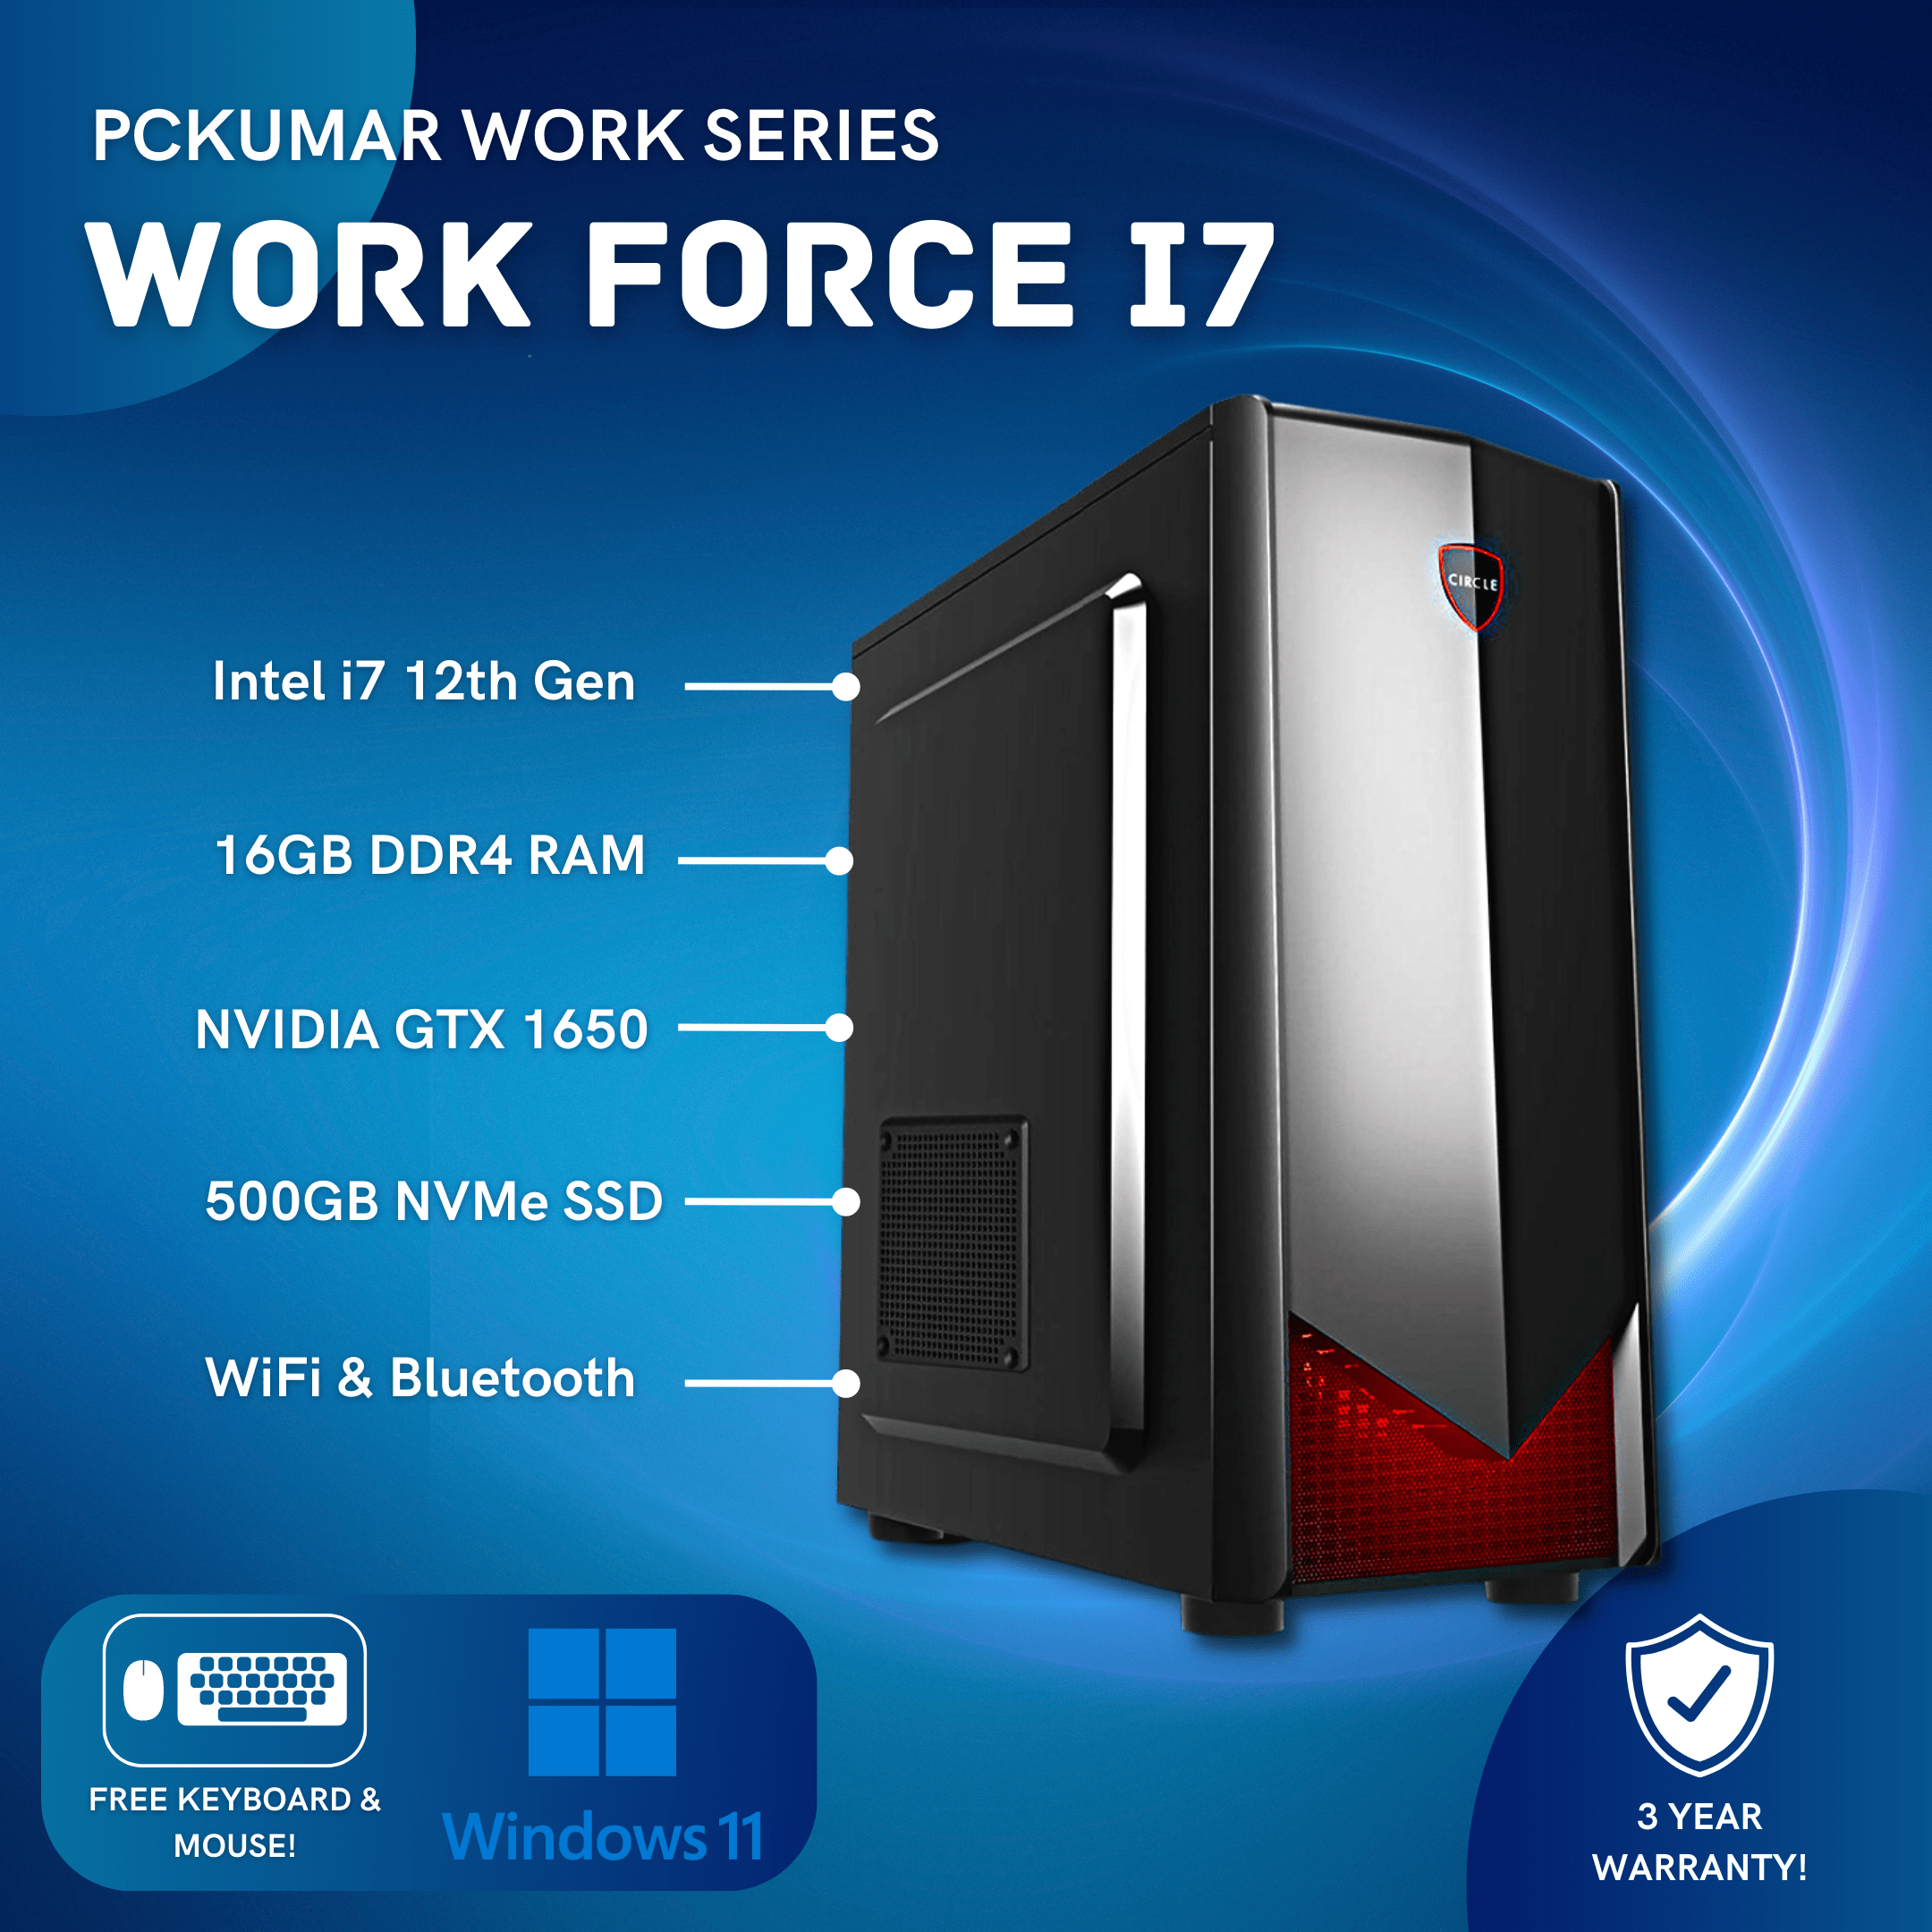 Work Force i7 12th Gen PC for 67499/-